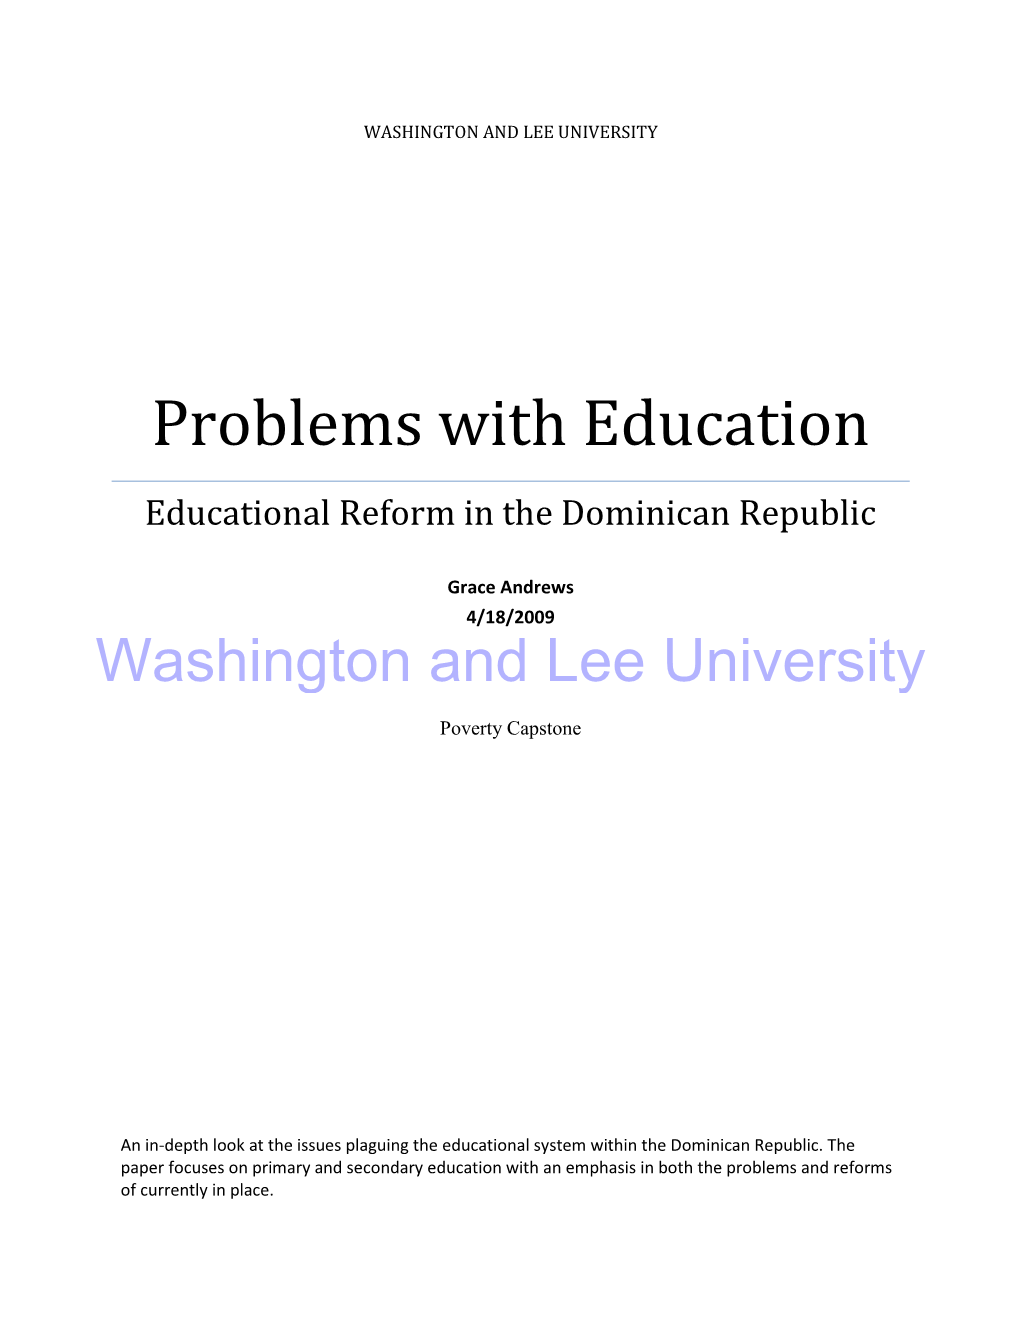 Problems with Education Educational Reform in the Dominican Republic